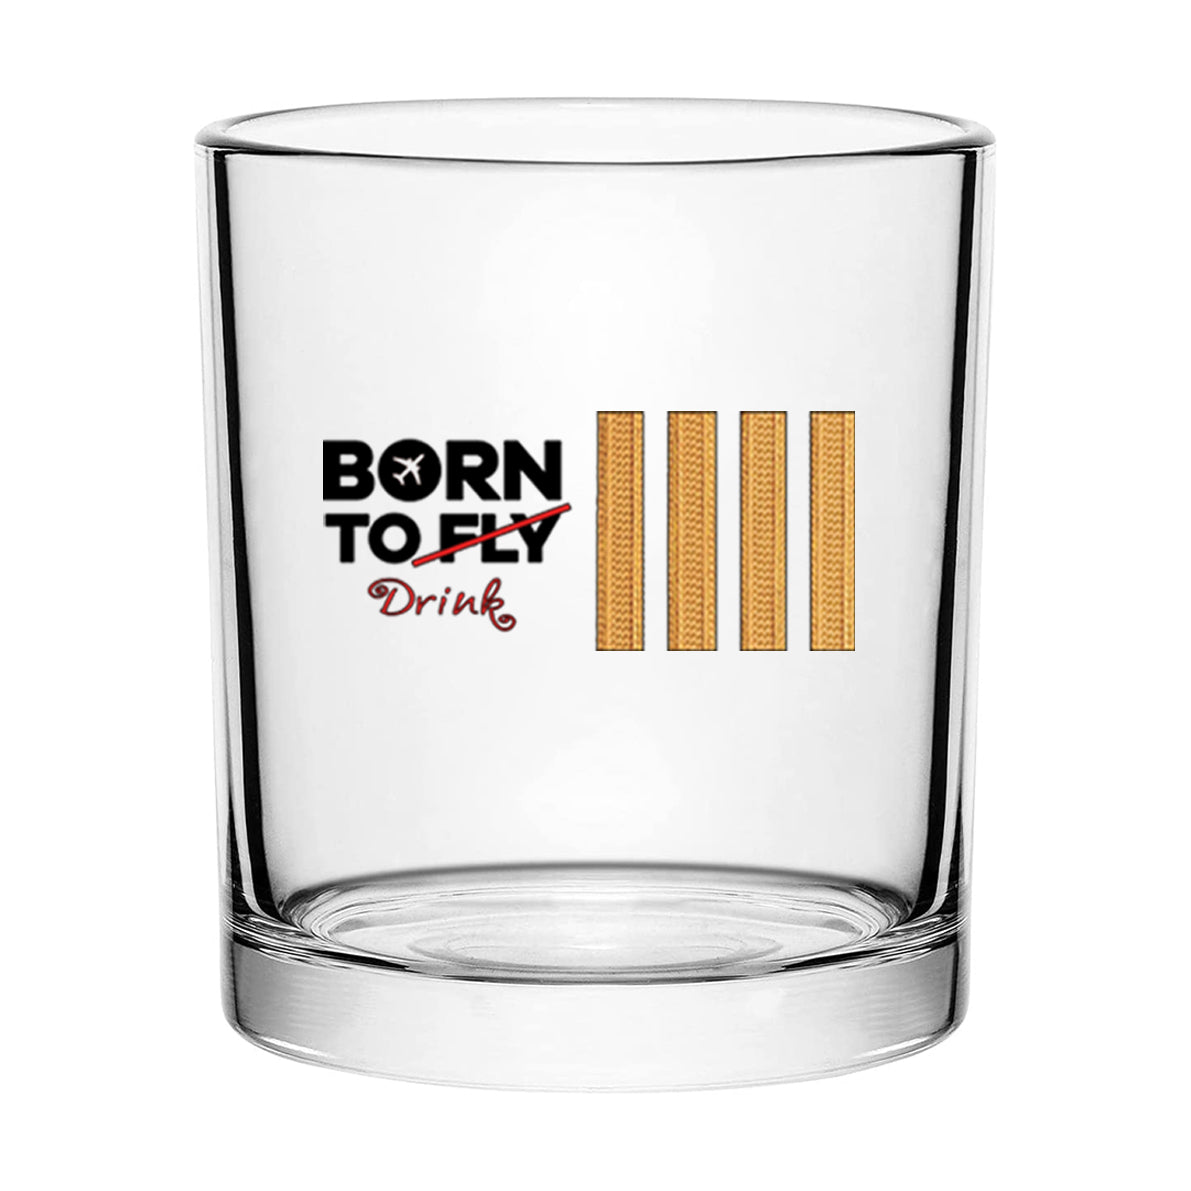 Born To Drink & 4 Lines Designed Special Whiskey Glasses